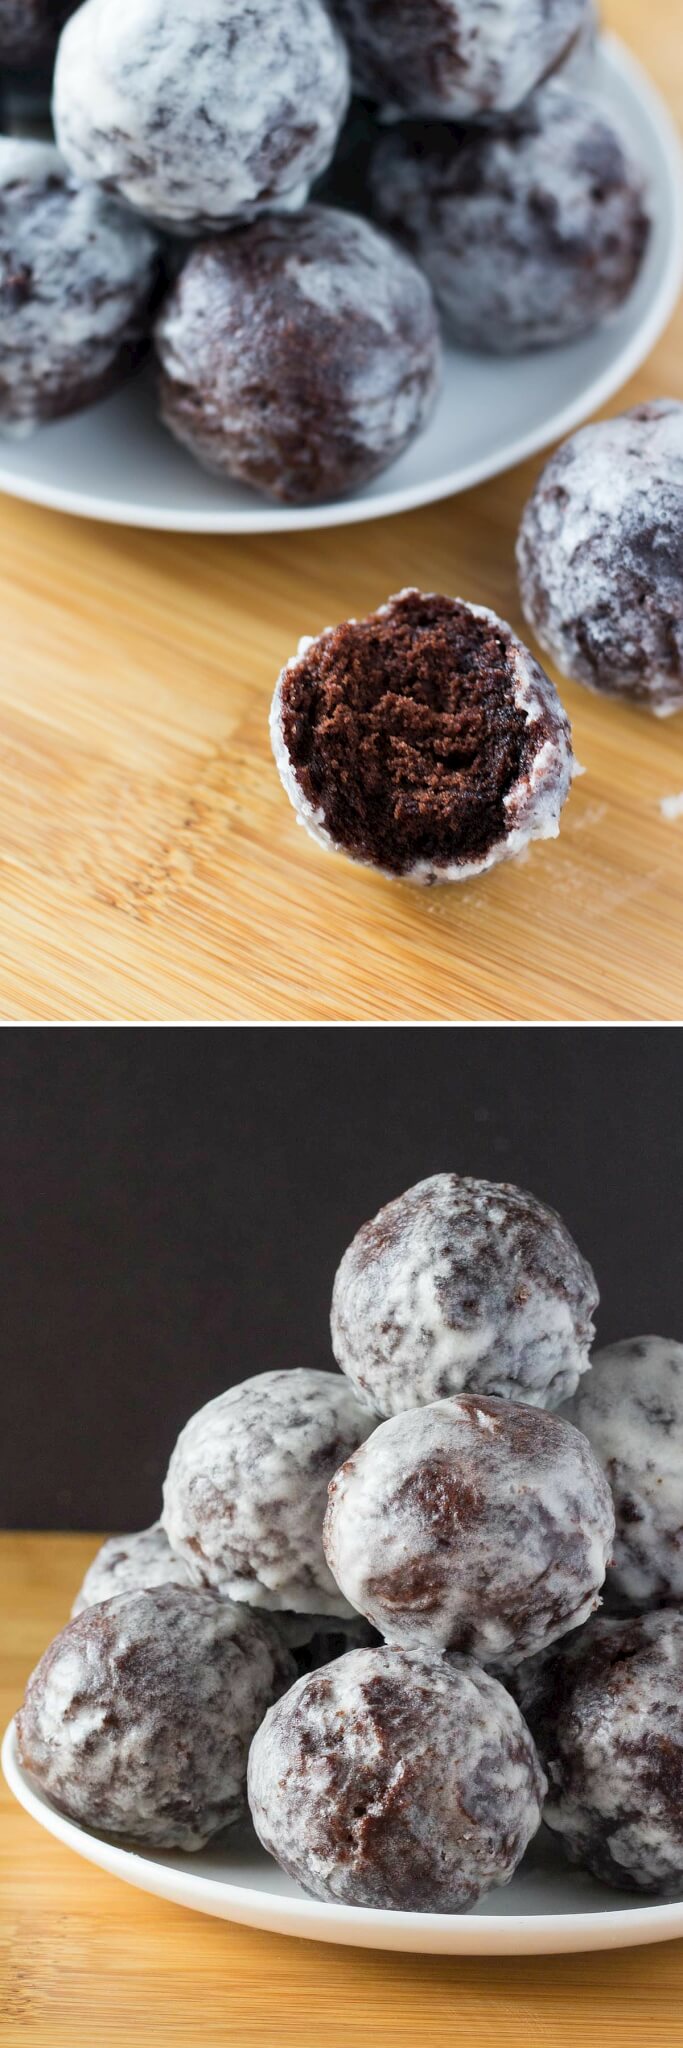 Perfectly fudgy Chocolate Doughnut Holes dipped in sweet vanilla glaze! Fluffy, oh so moist & so much better than the doughnut shop! www.justsotasty.com